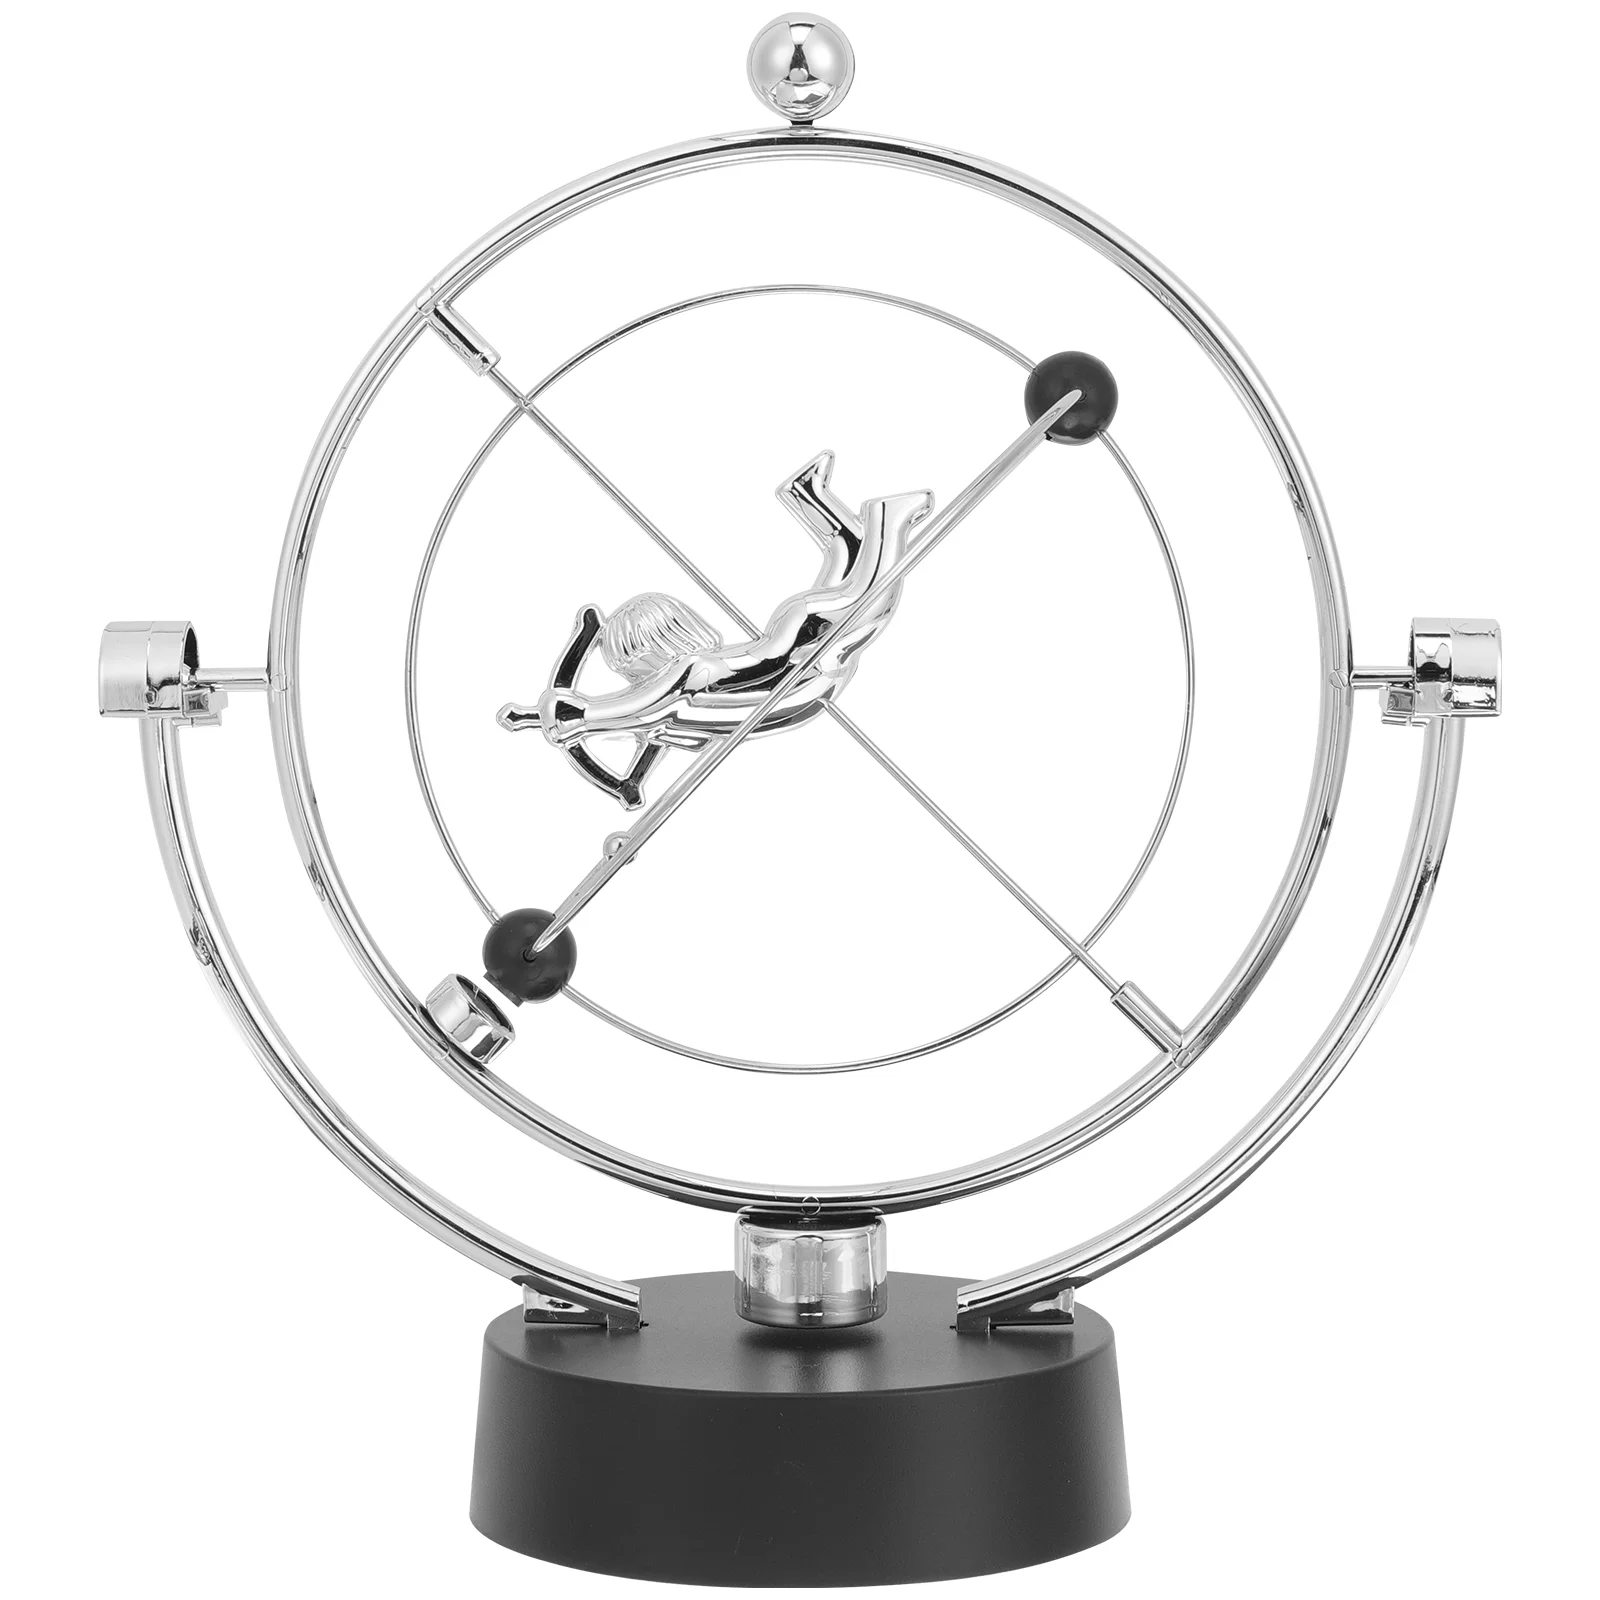 

Home Accents Decor Cupid Perpetual Motion Desktop Ornament The Swing Toy Toys Gadgets Office Table